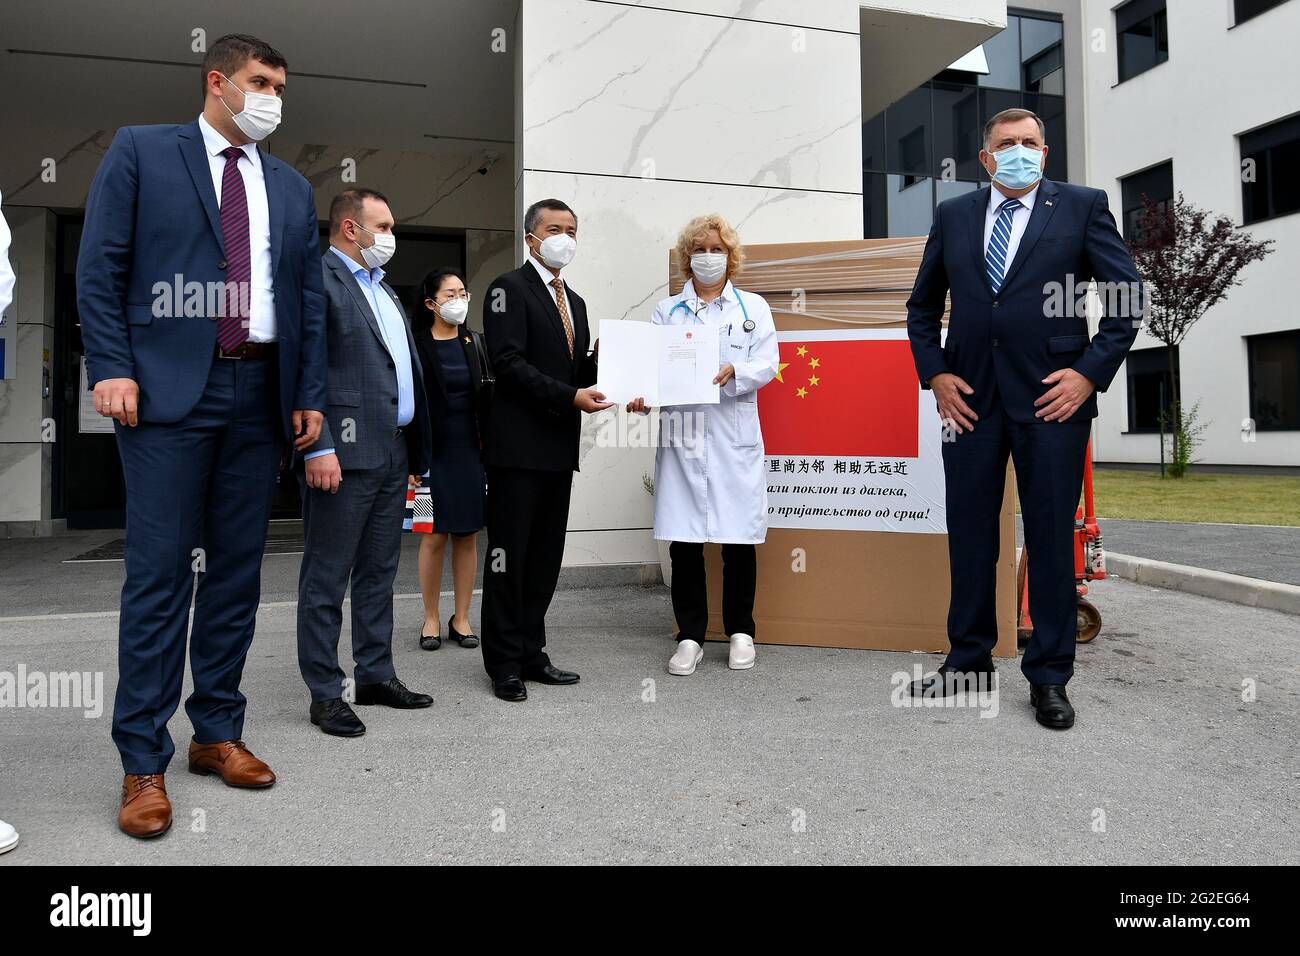 (210611) -- SARAJEVO, June 11, 2021 (Xinhua) -- Milorad Dodik (1st R), chairman of the Presidency of Bosnia and Herzegovina (BiH), Jadranka Jovovic (2nd R), director of the oncology and hematology department of the Serbian Hospital, and Ji Ping (3rd R), Chinese Ambassador to BiH attend a donation ceremony of a biological safety cabinet (also known as cyto chamber) at the Serbian Hospital, in East Sarajevo, BiH, on June 10, 2021. The Chinese Embassy in BiH on Thursday donated a biological safety cabinet to the Serbian Hospital in East Sarajevo.TO GO WITH 'China donates medical equipment to hosp Stock Photo